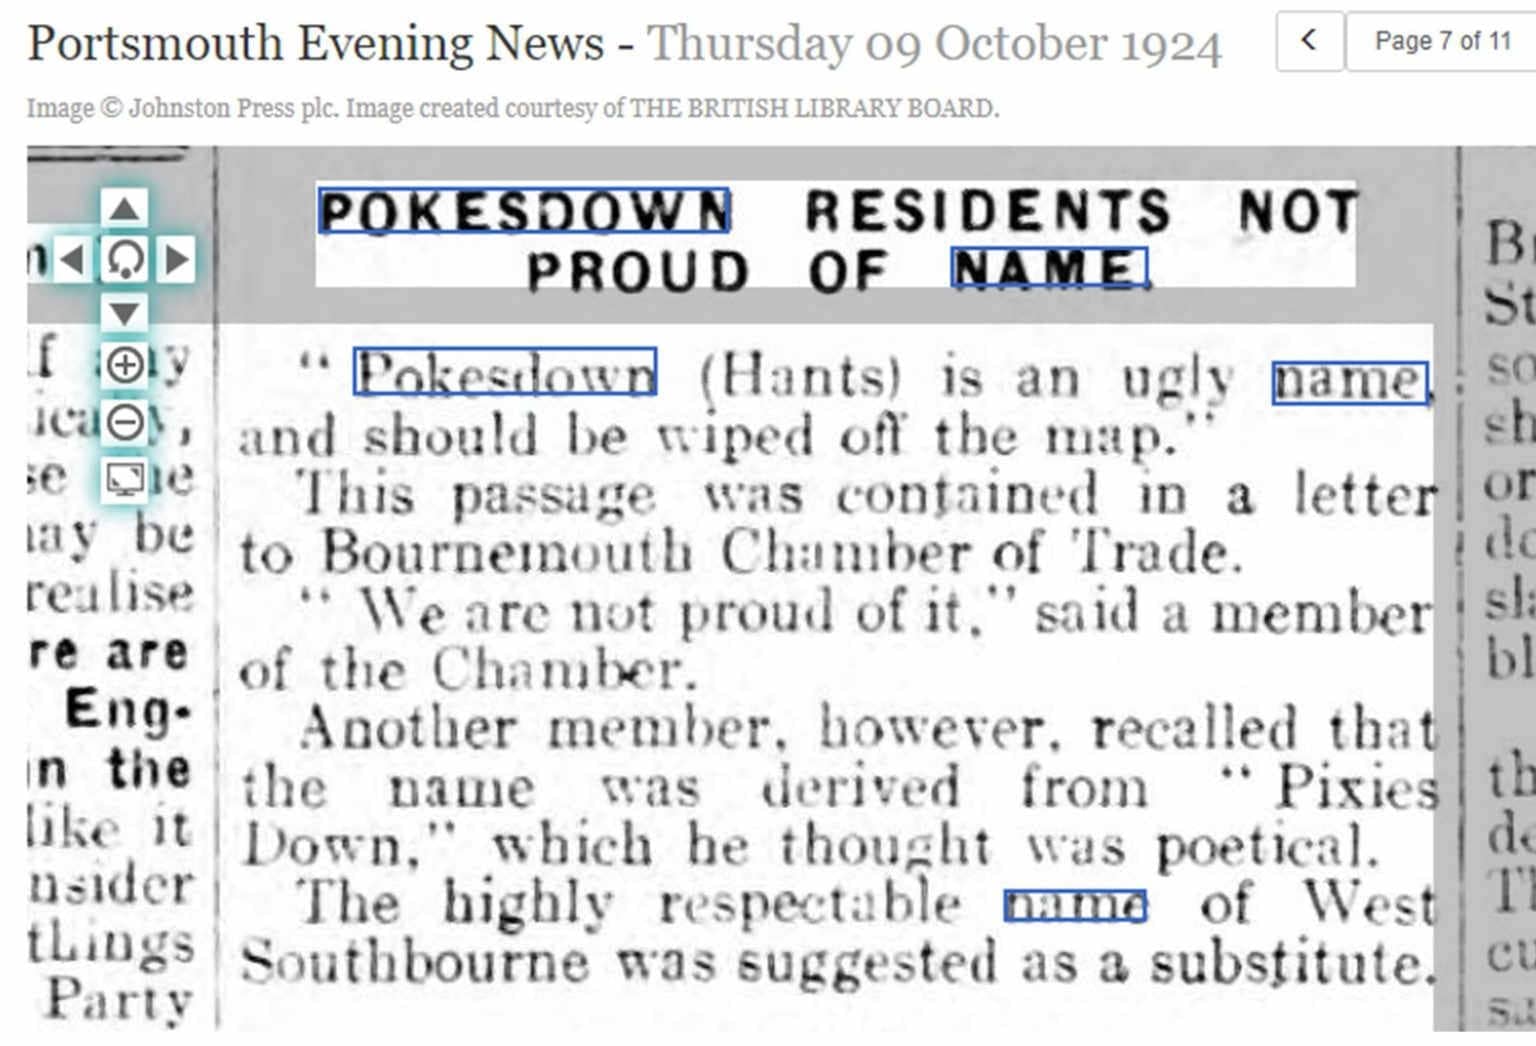 article in Portsmouth Evening News, October 1924, saying Pokesdown is an ugly name